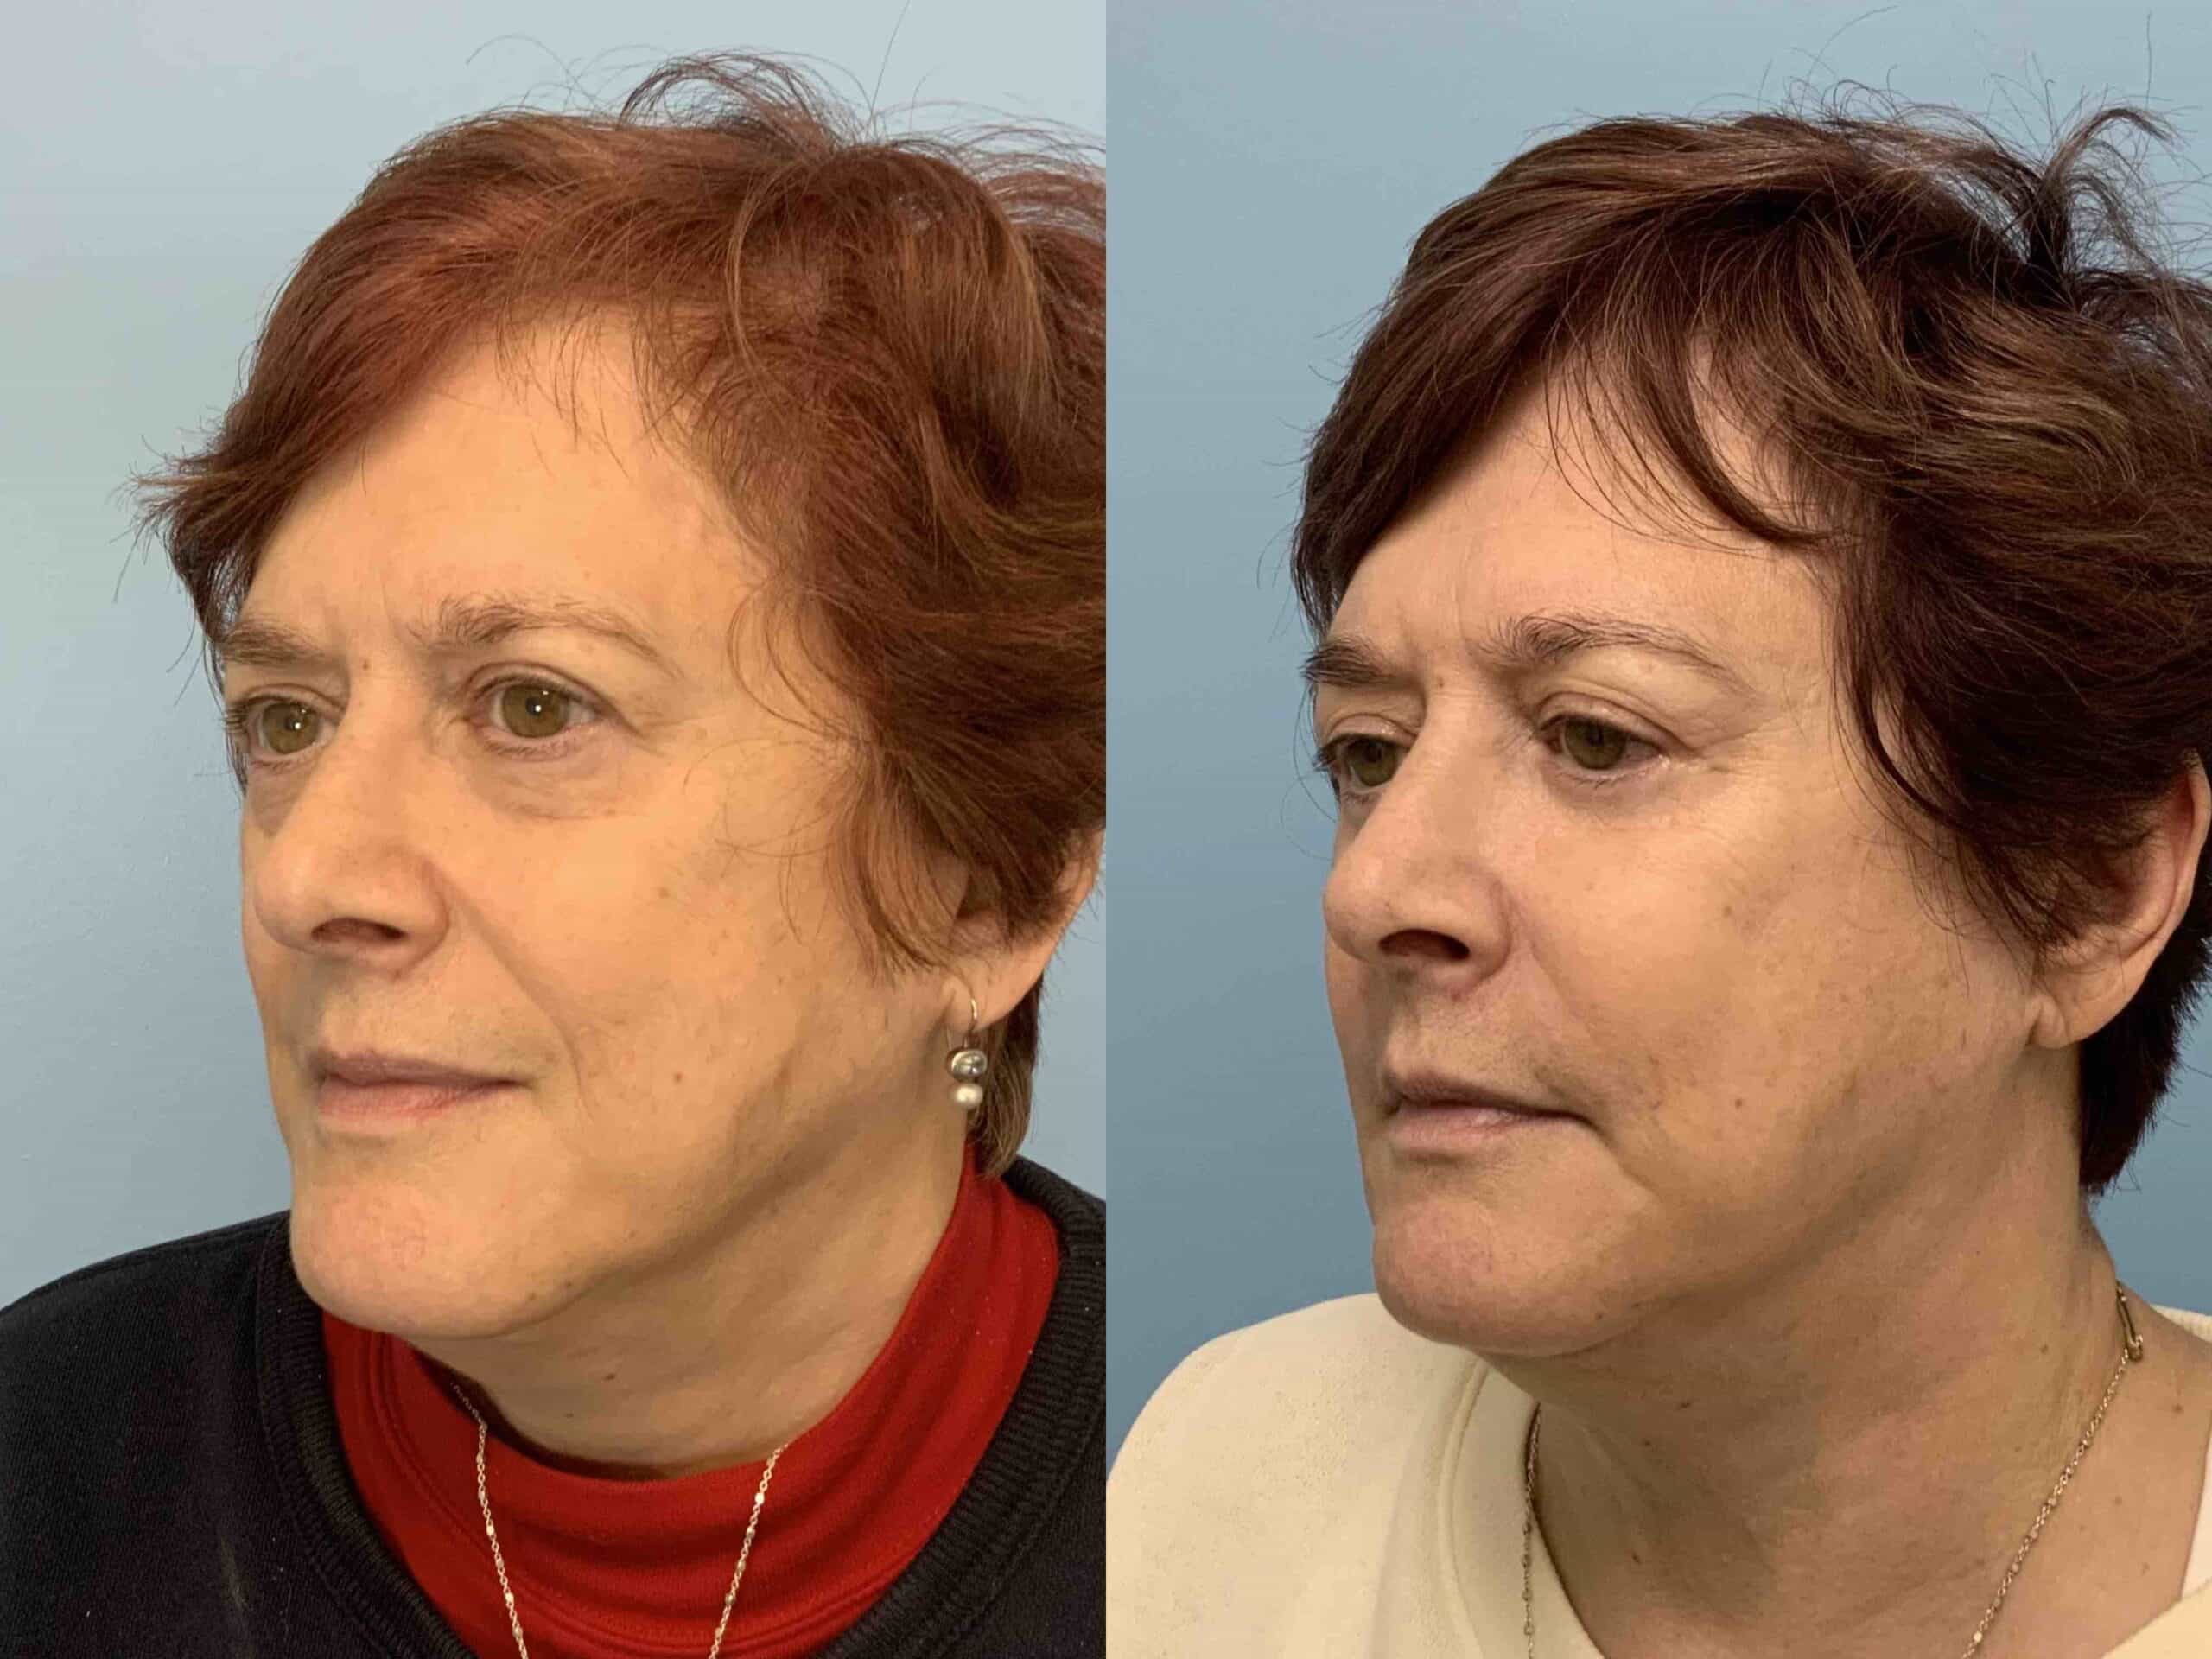 Before and after, 2y 8mo post op from Lower Blepharoplasty, Canthopexy performed by Dr. Paul Vanek (diagonal view)